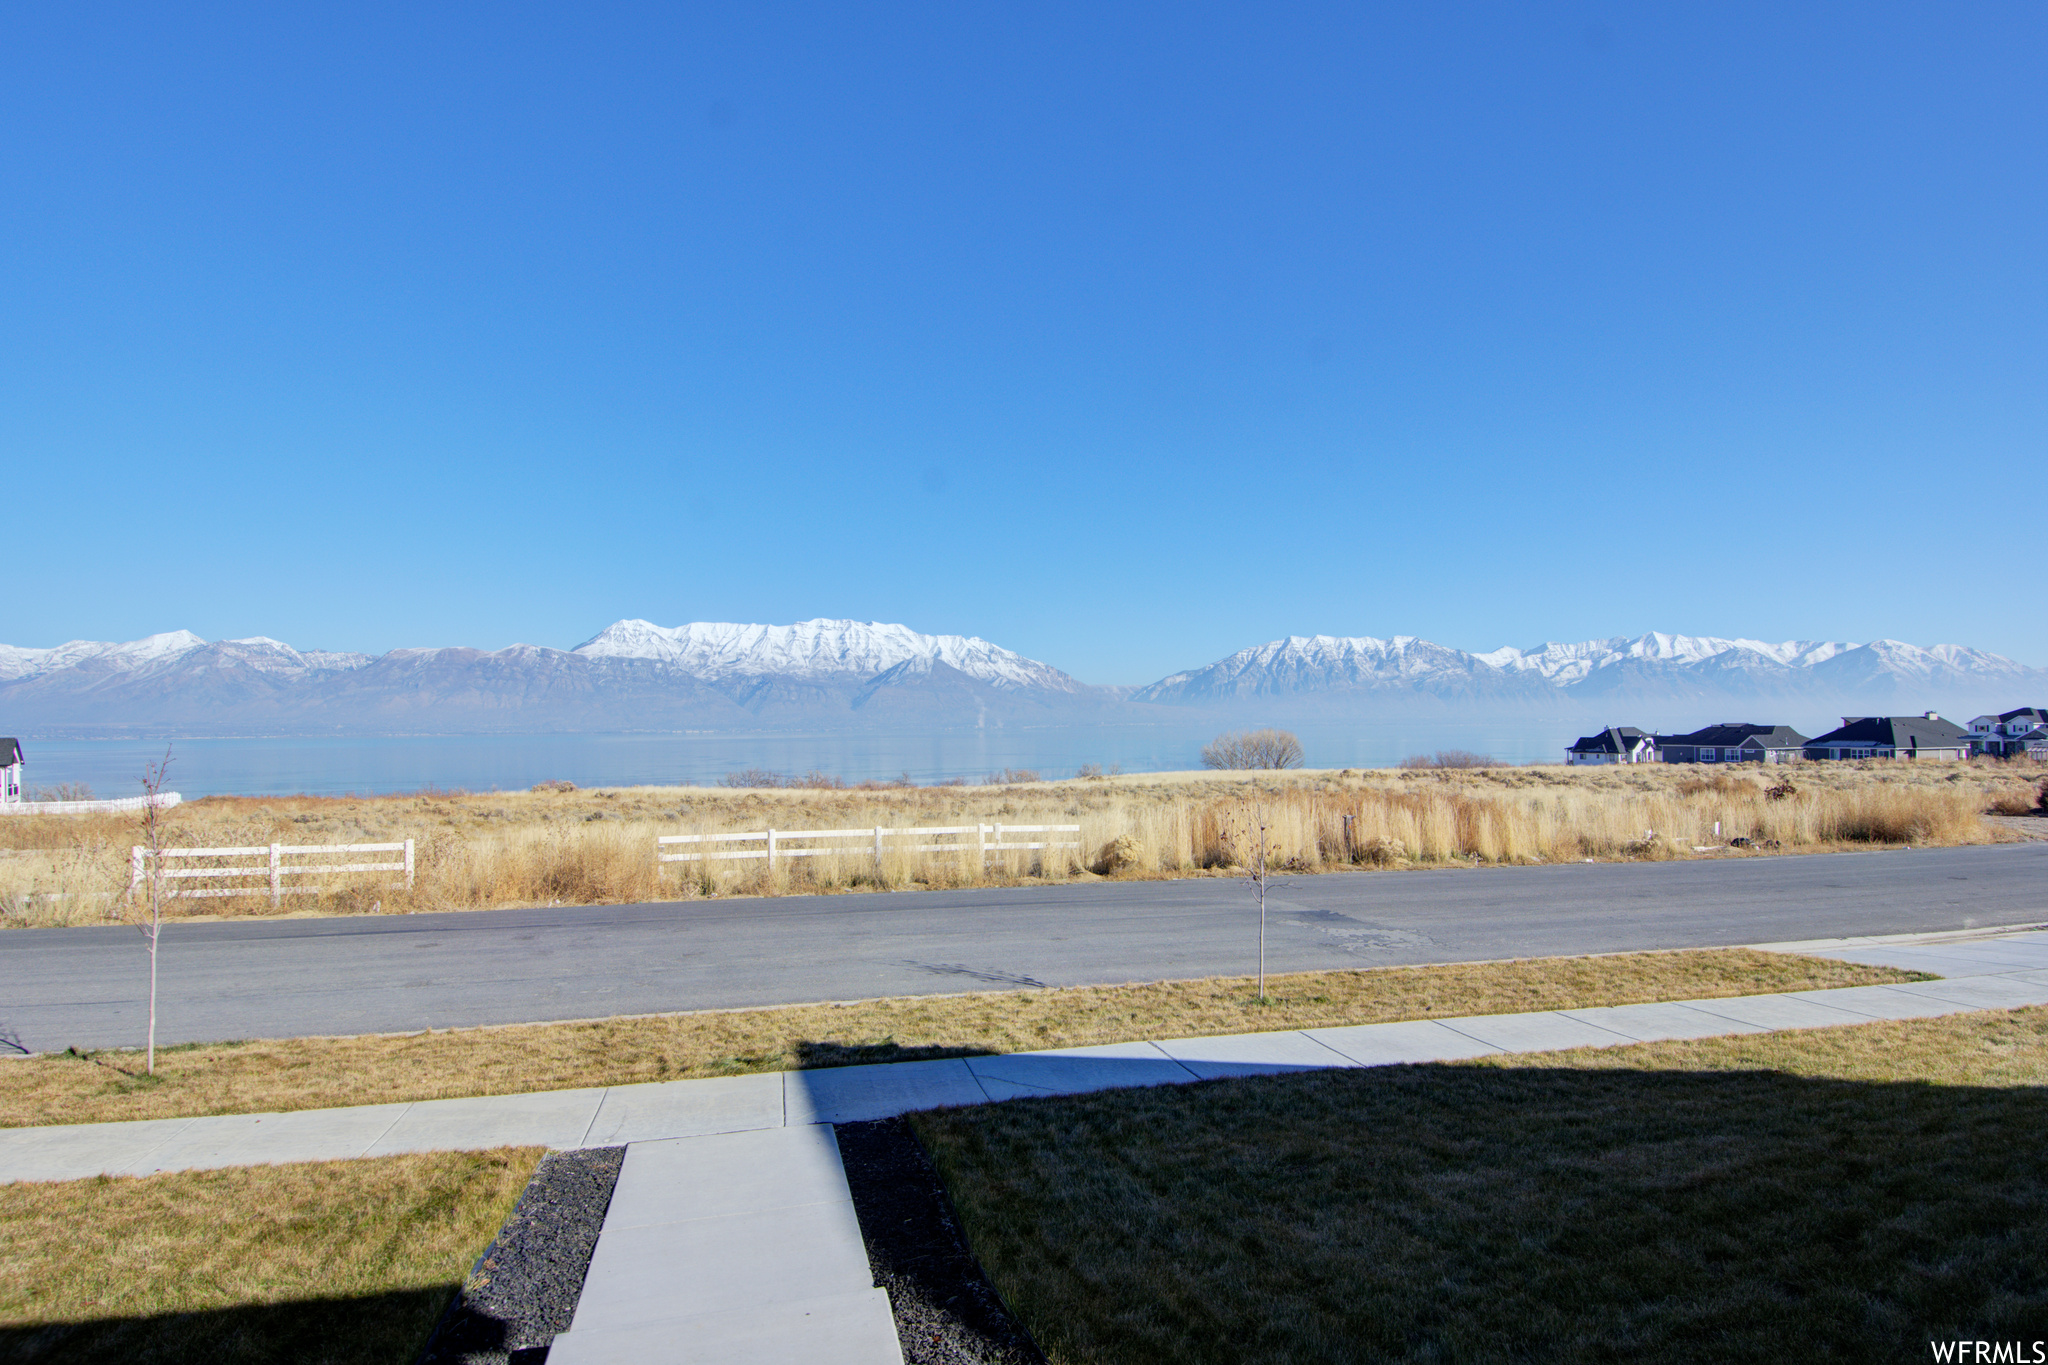 View from front porch overlooking Utah Lake and Timpanogos